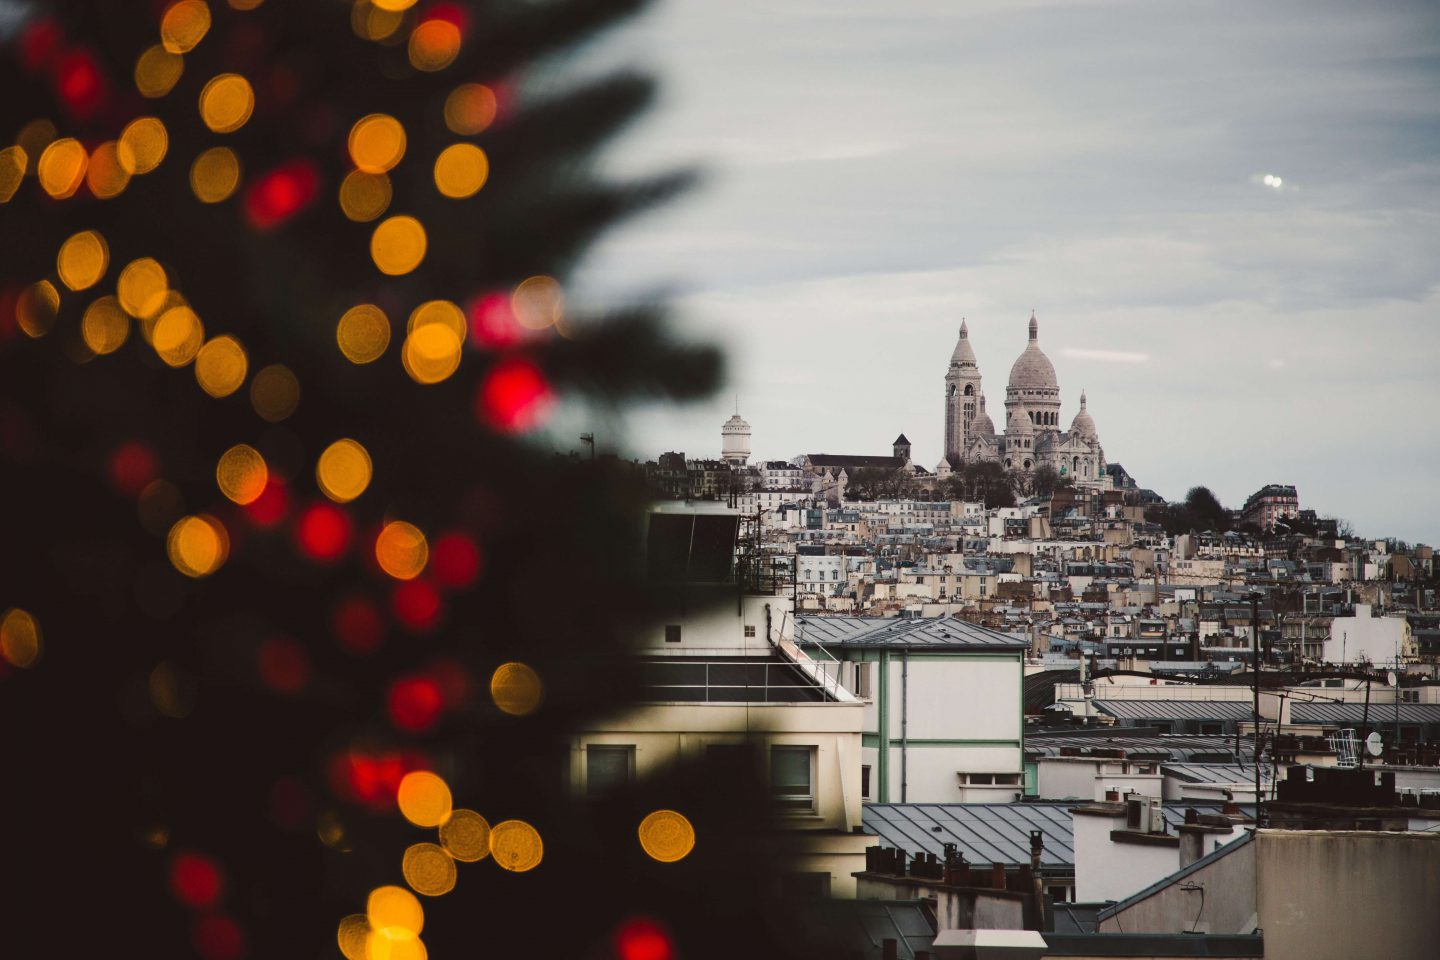 A photo of a Christmas tree in the forefront with Paris scenery in the background